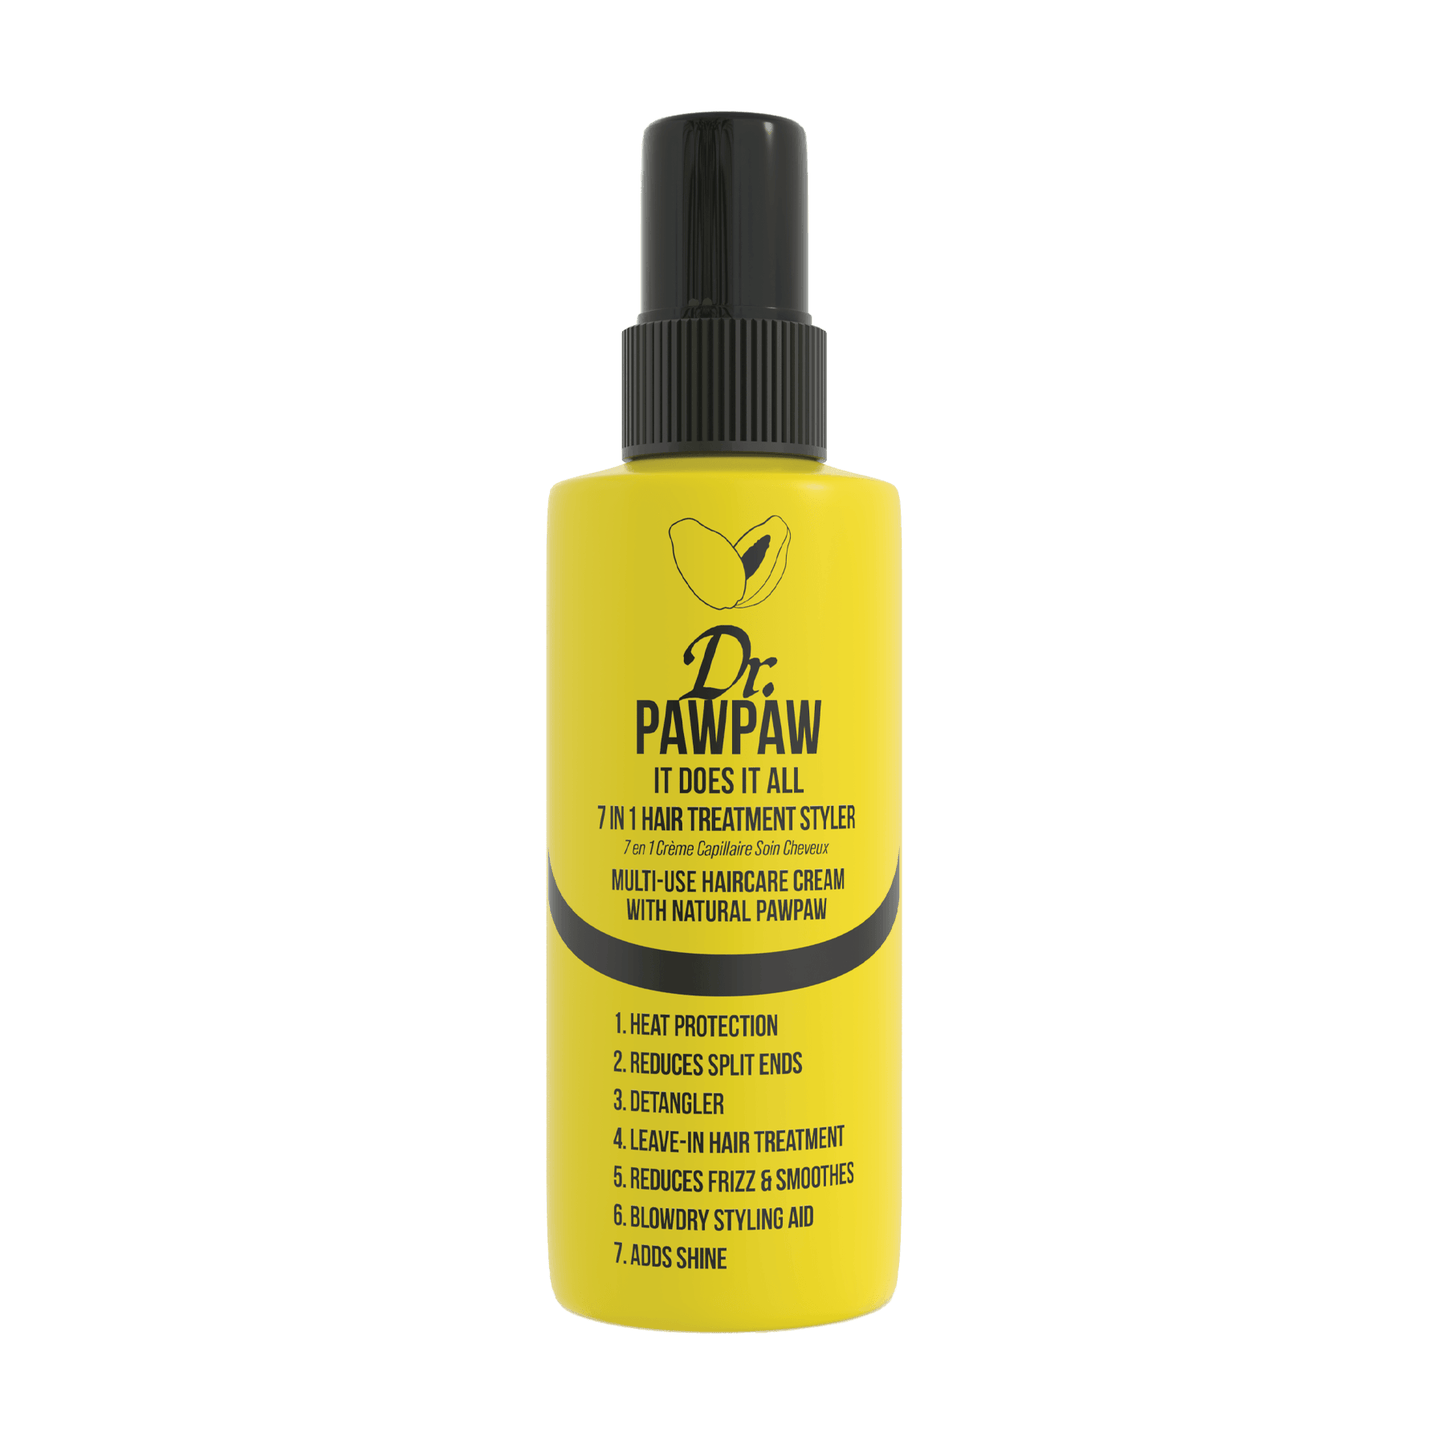 It Does It All - 7 in 1 Hair Treatment Styler 100ml - Dr Paw Paw